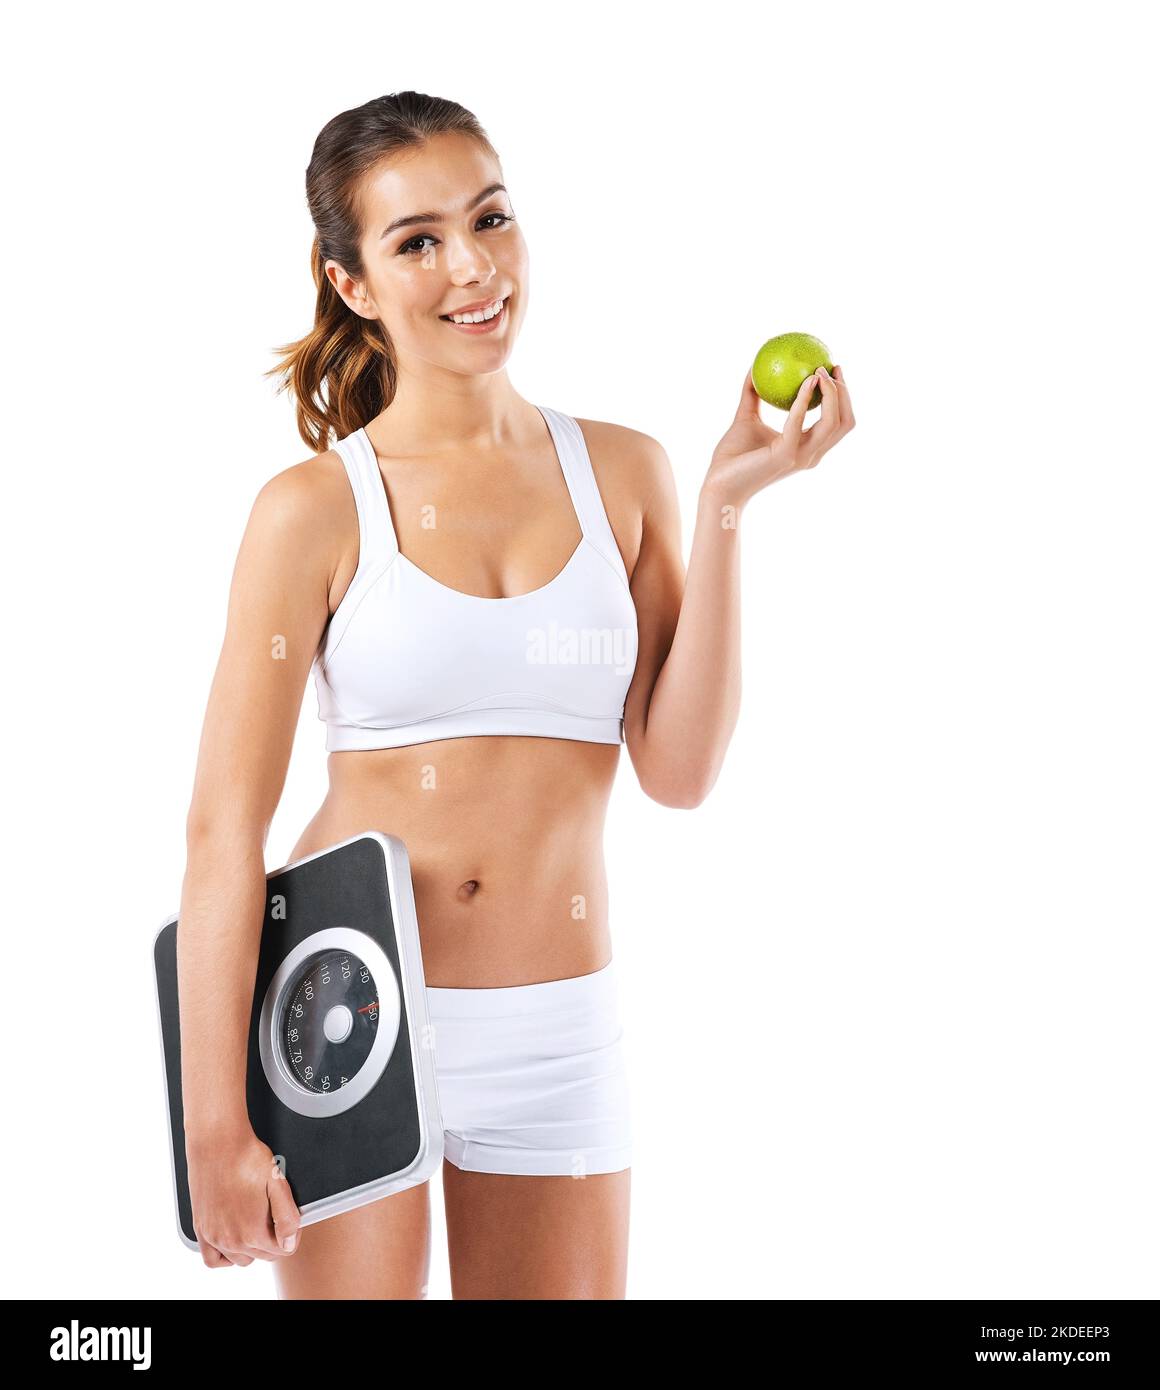 https://c8.alamy.com/comp/2KDEEP3/the-only-thing-worth-losing-is-weight-a-young-woman-eating-an-apple-while-holding-a-scale-2KDEEP3.jpg